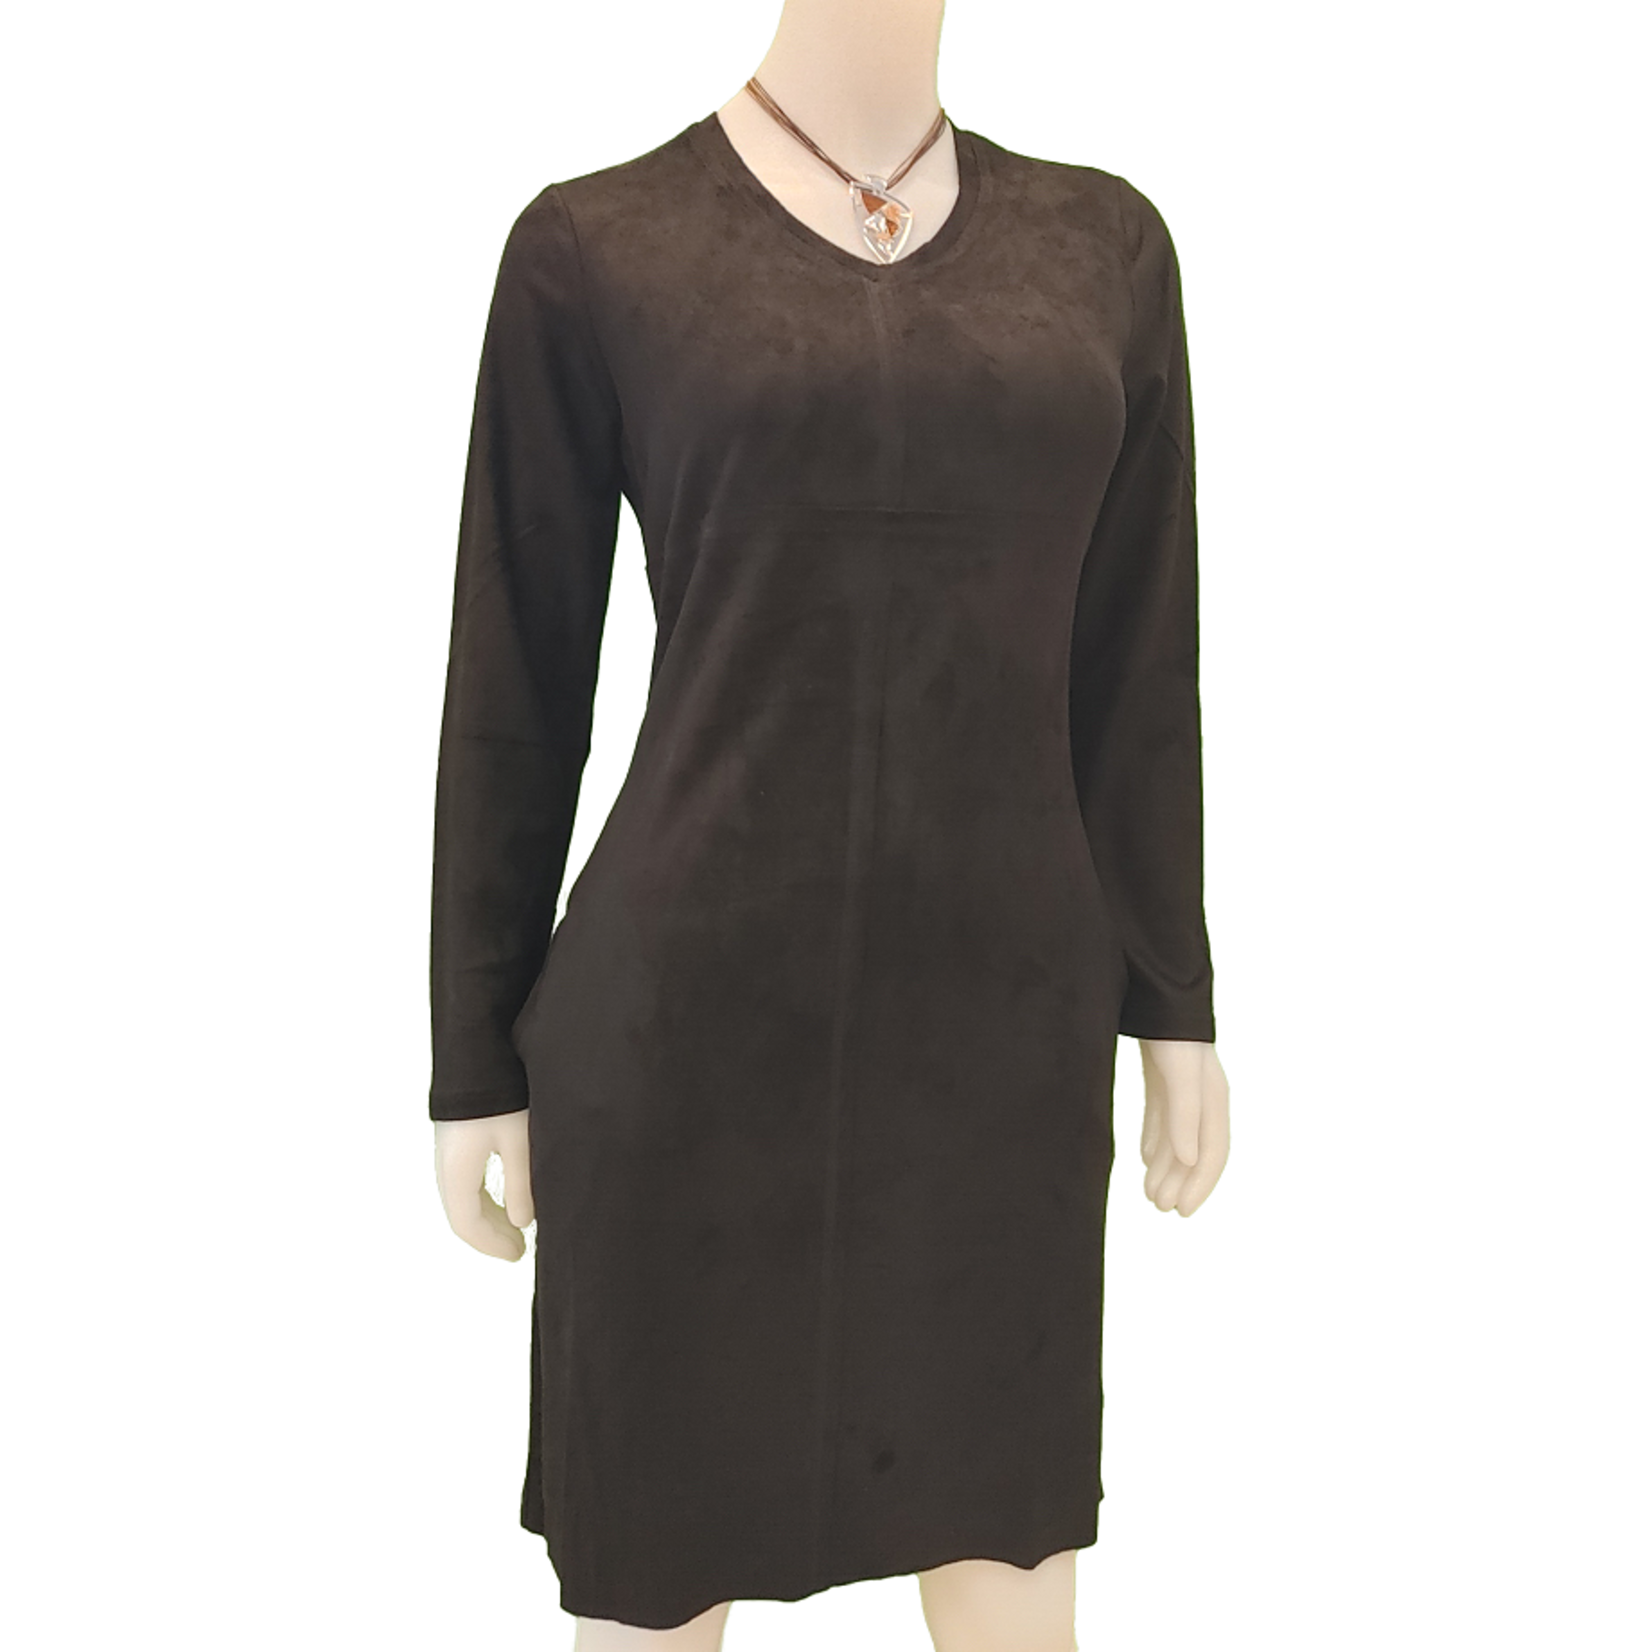 bolide Bolide ladies long sleeve v-neck faux suede woven dress, dresses